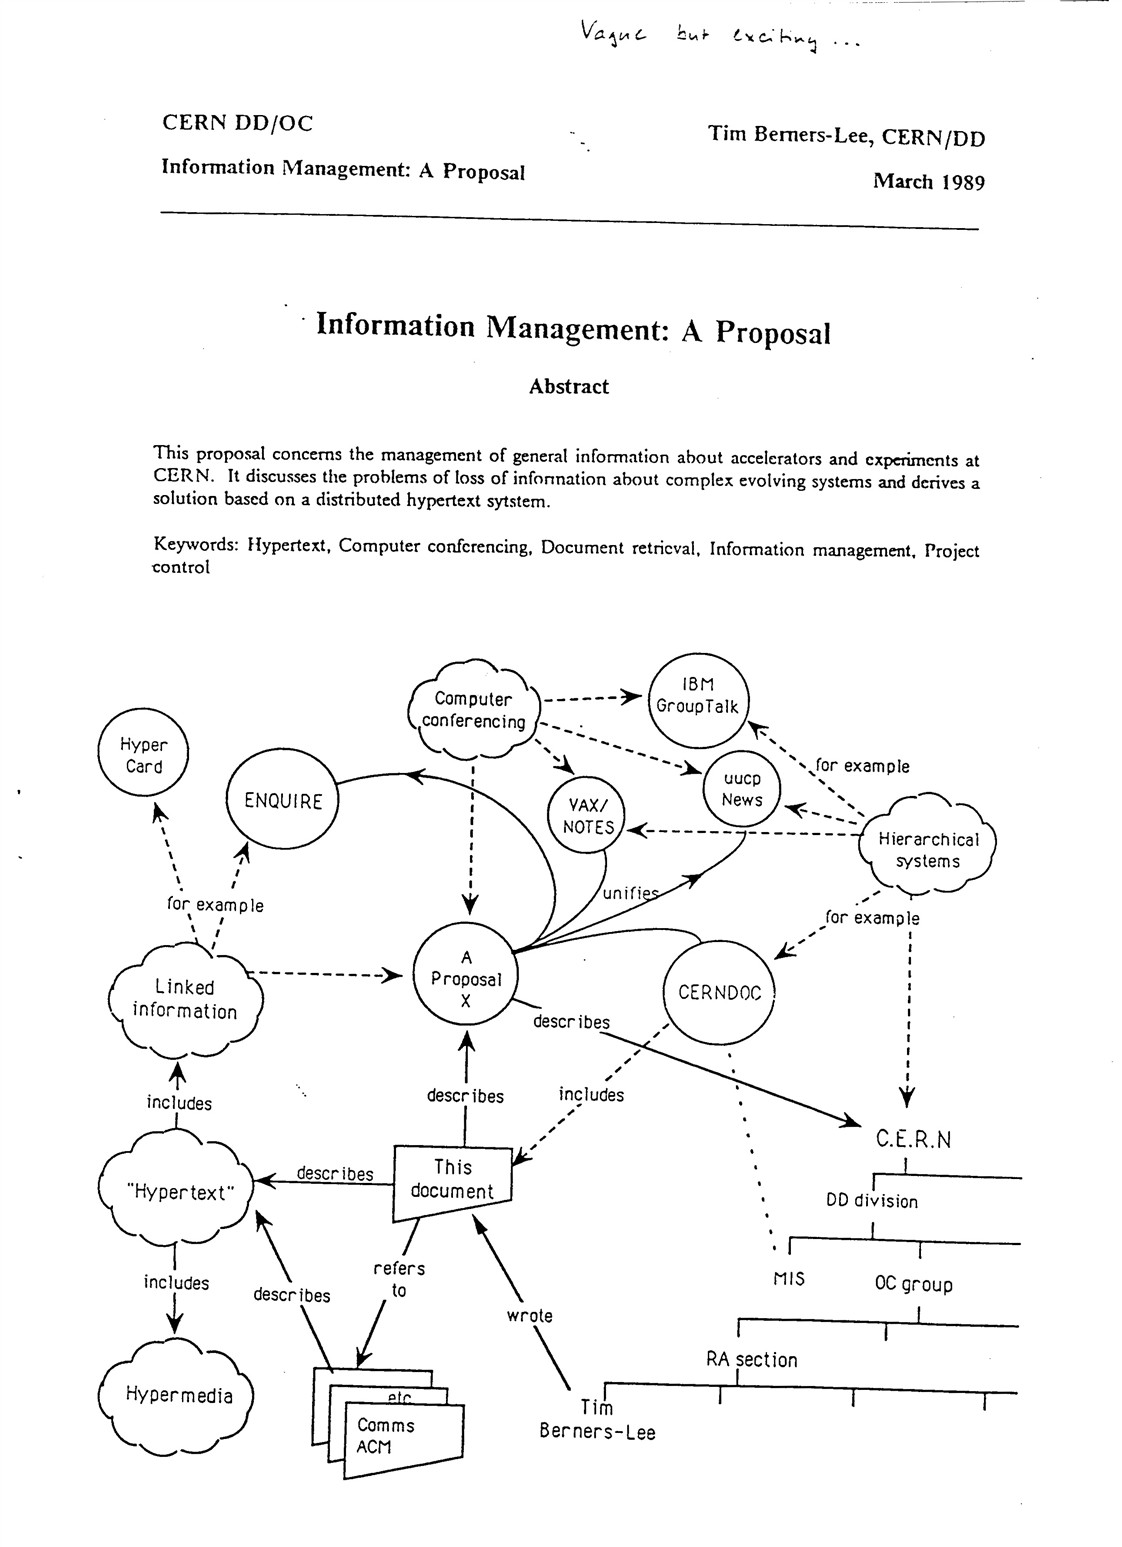 First page of 'Information Management: A Proposal'